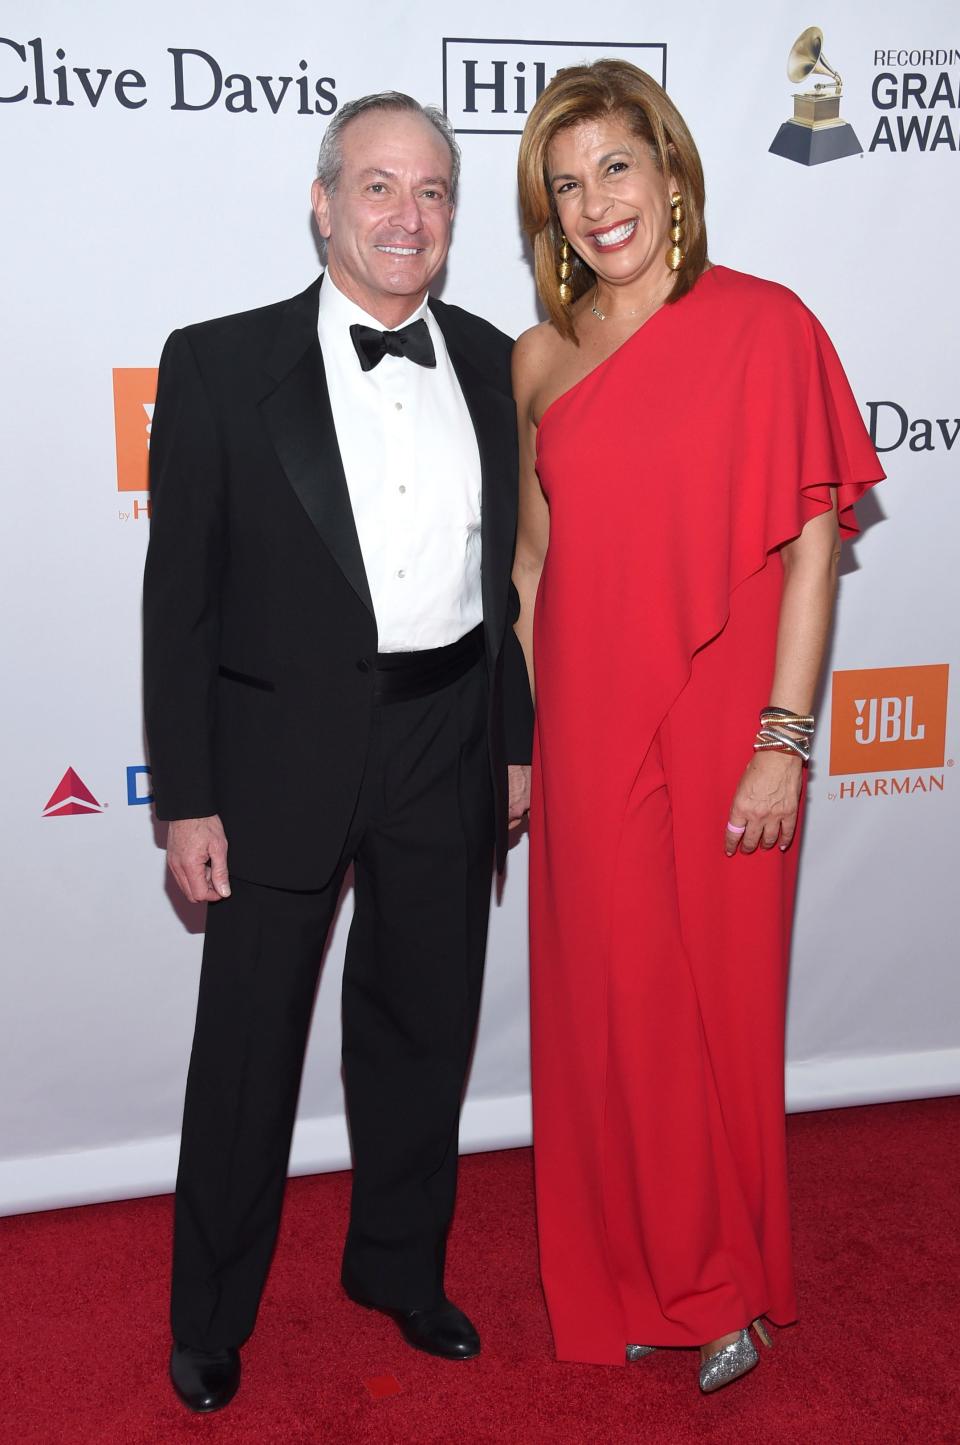 Hoda Kotb and fiance Joel Schiffman are starting to plan their wedding after getting engaged over the weekend.